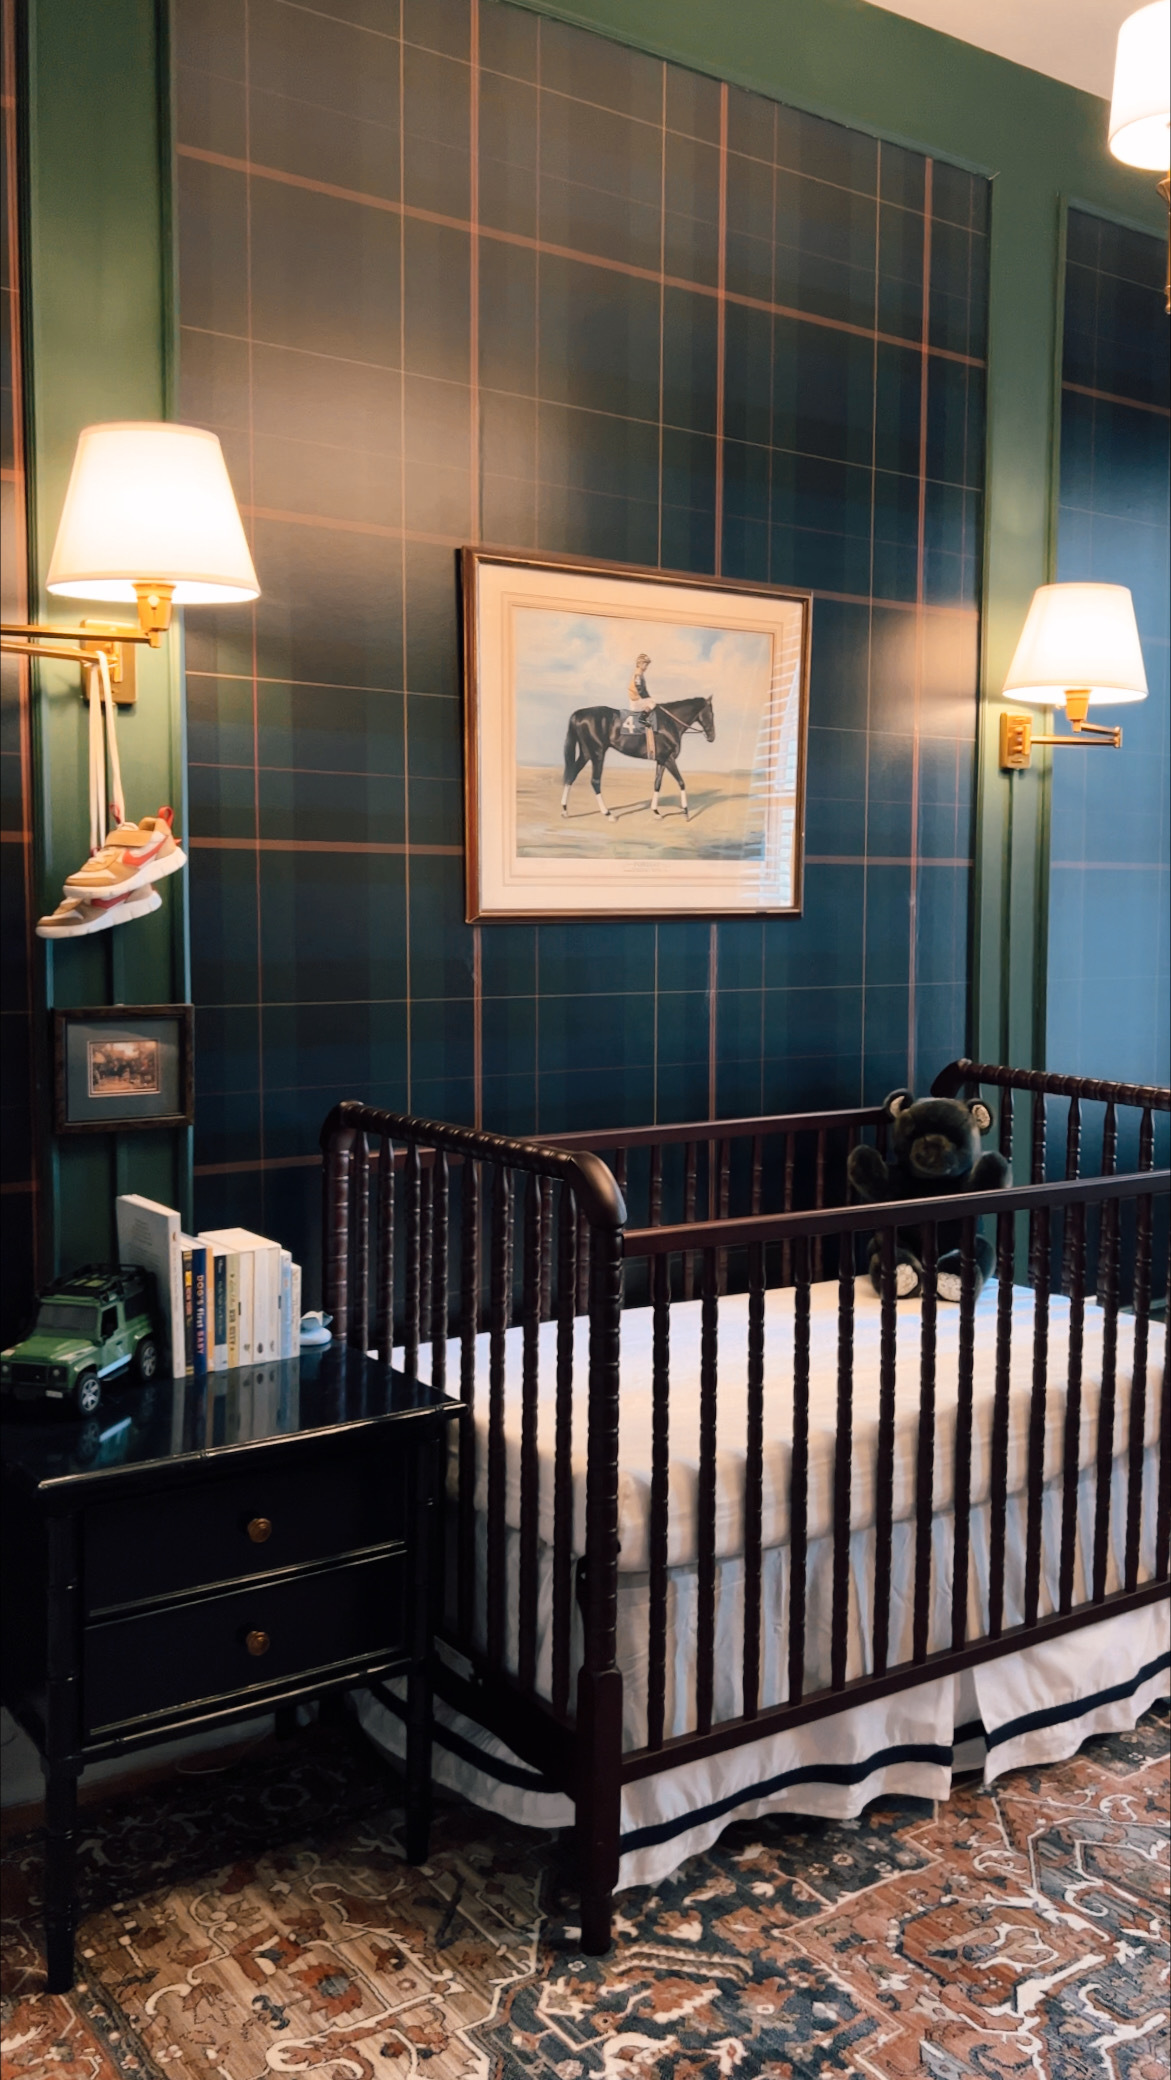 Anna's Upper East Side apartment nursery with moody colors, dark green and navy blues, with two scones for light.